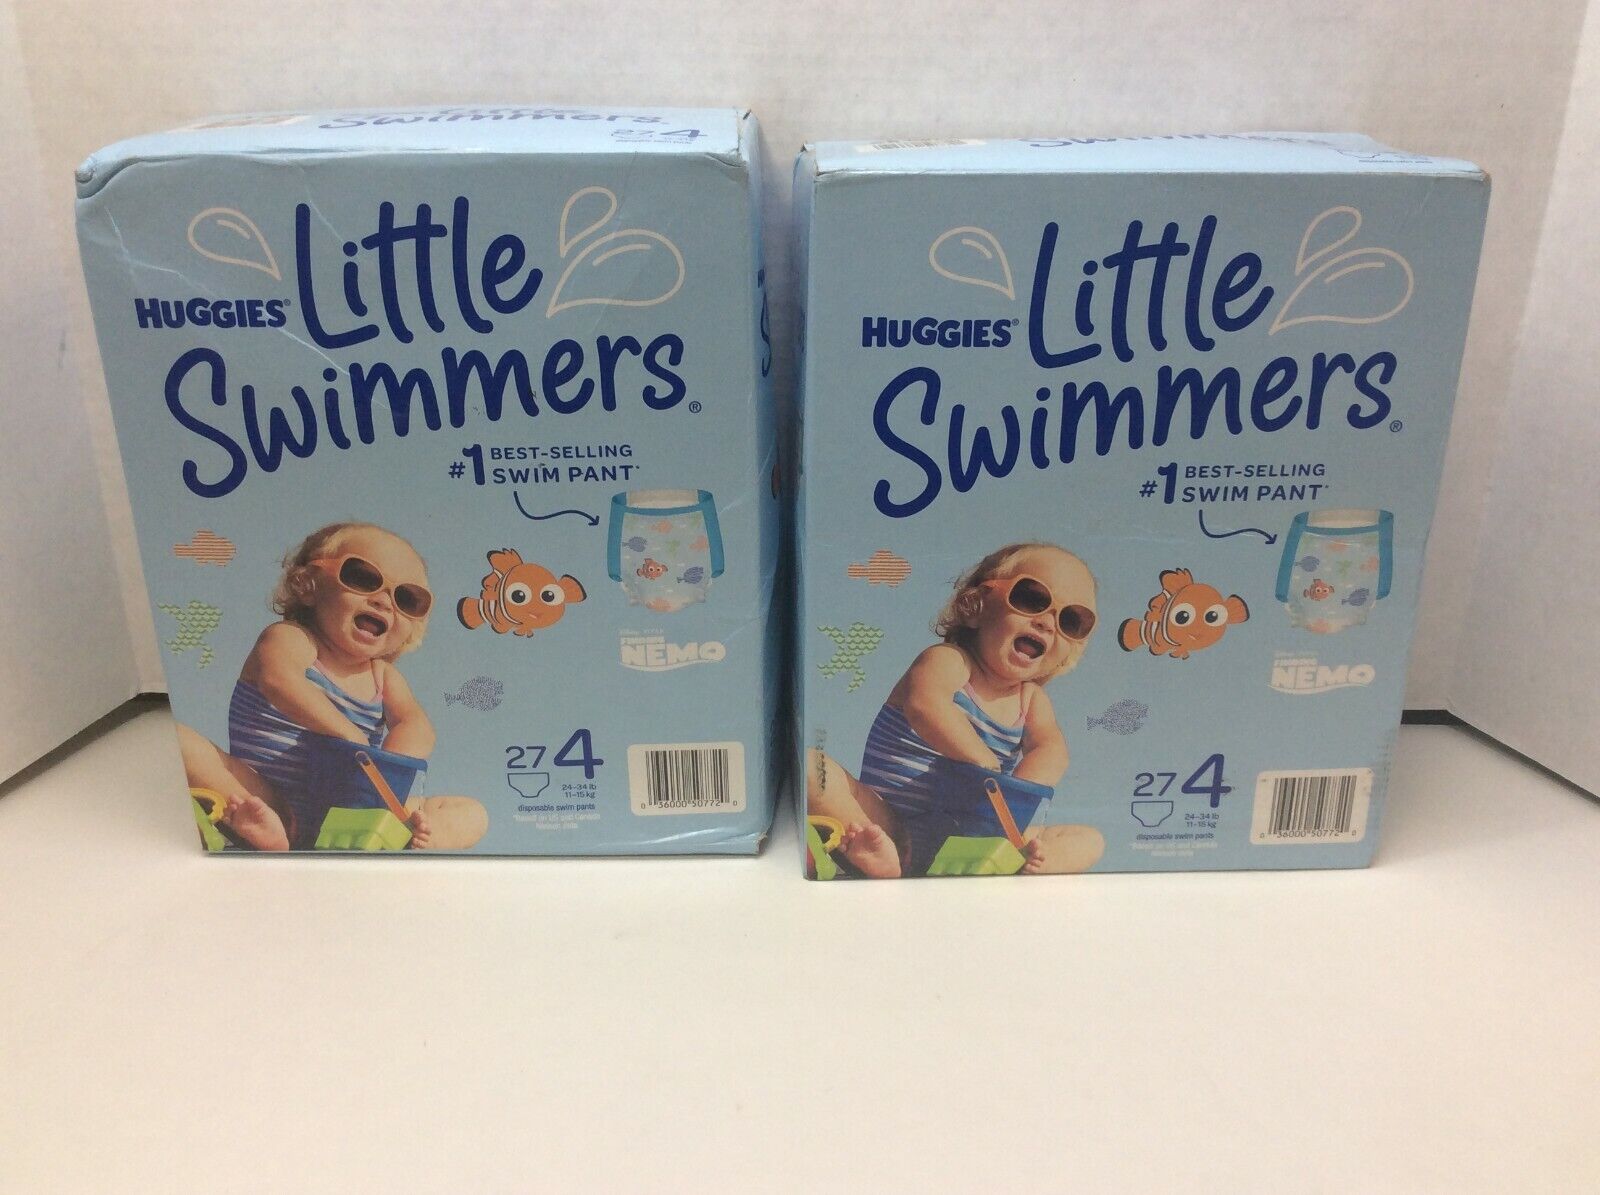 Huggies Little Swimmers Diapers 27 Count Size 4 Nemo, 2 Boxes, Free Shipping